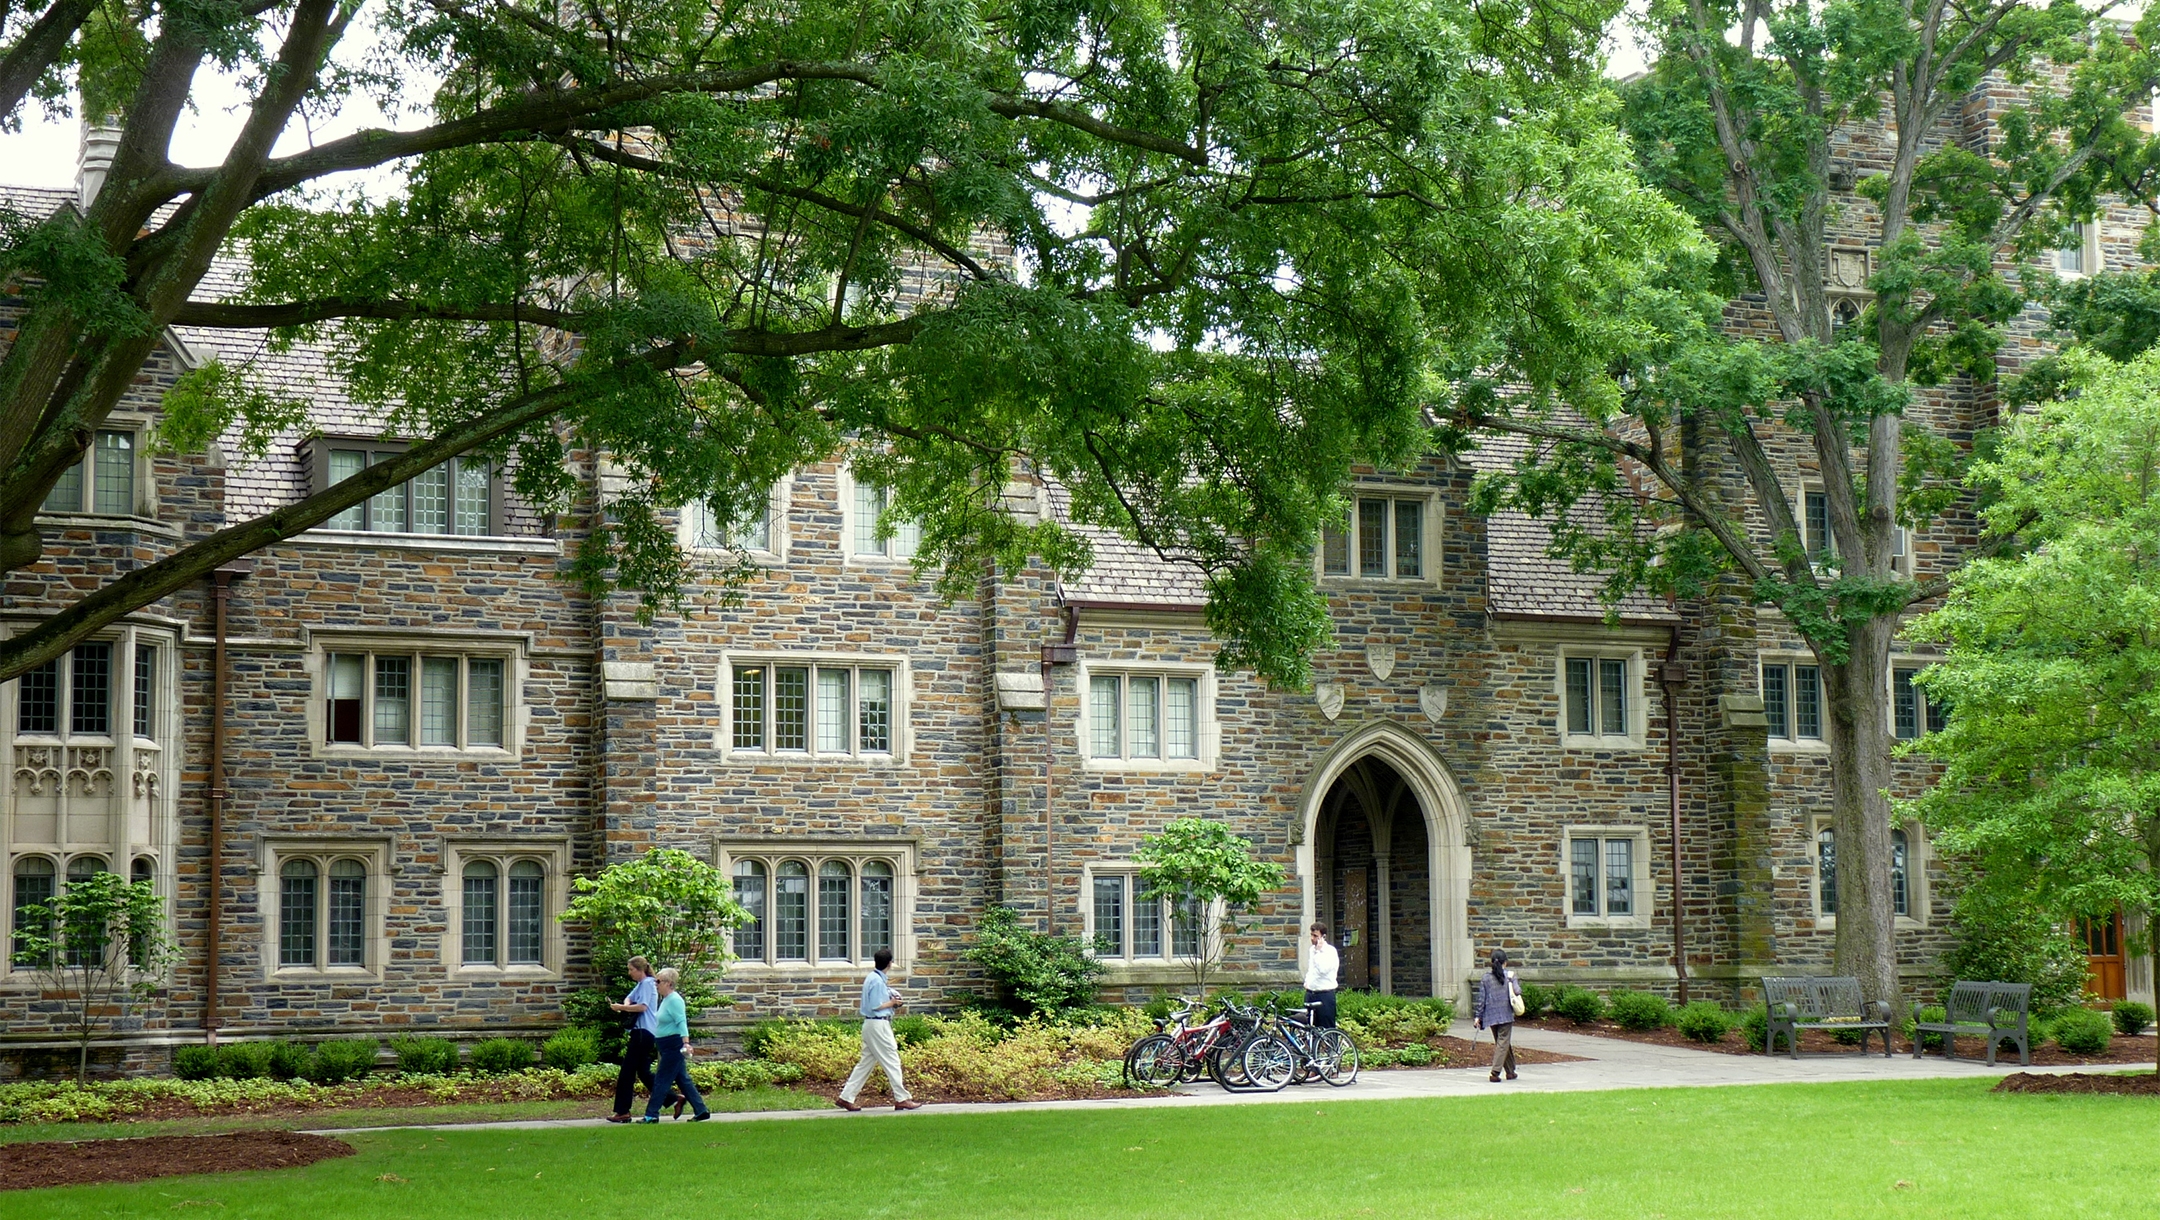 Pedestrians walking in the campus of Duke University on May 14, 2011 (Wikimedia Commons)